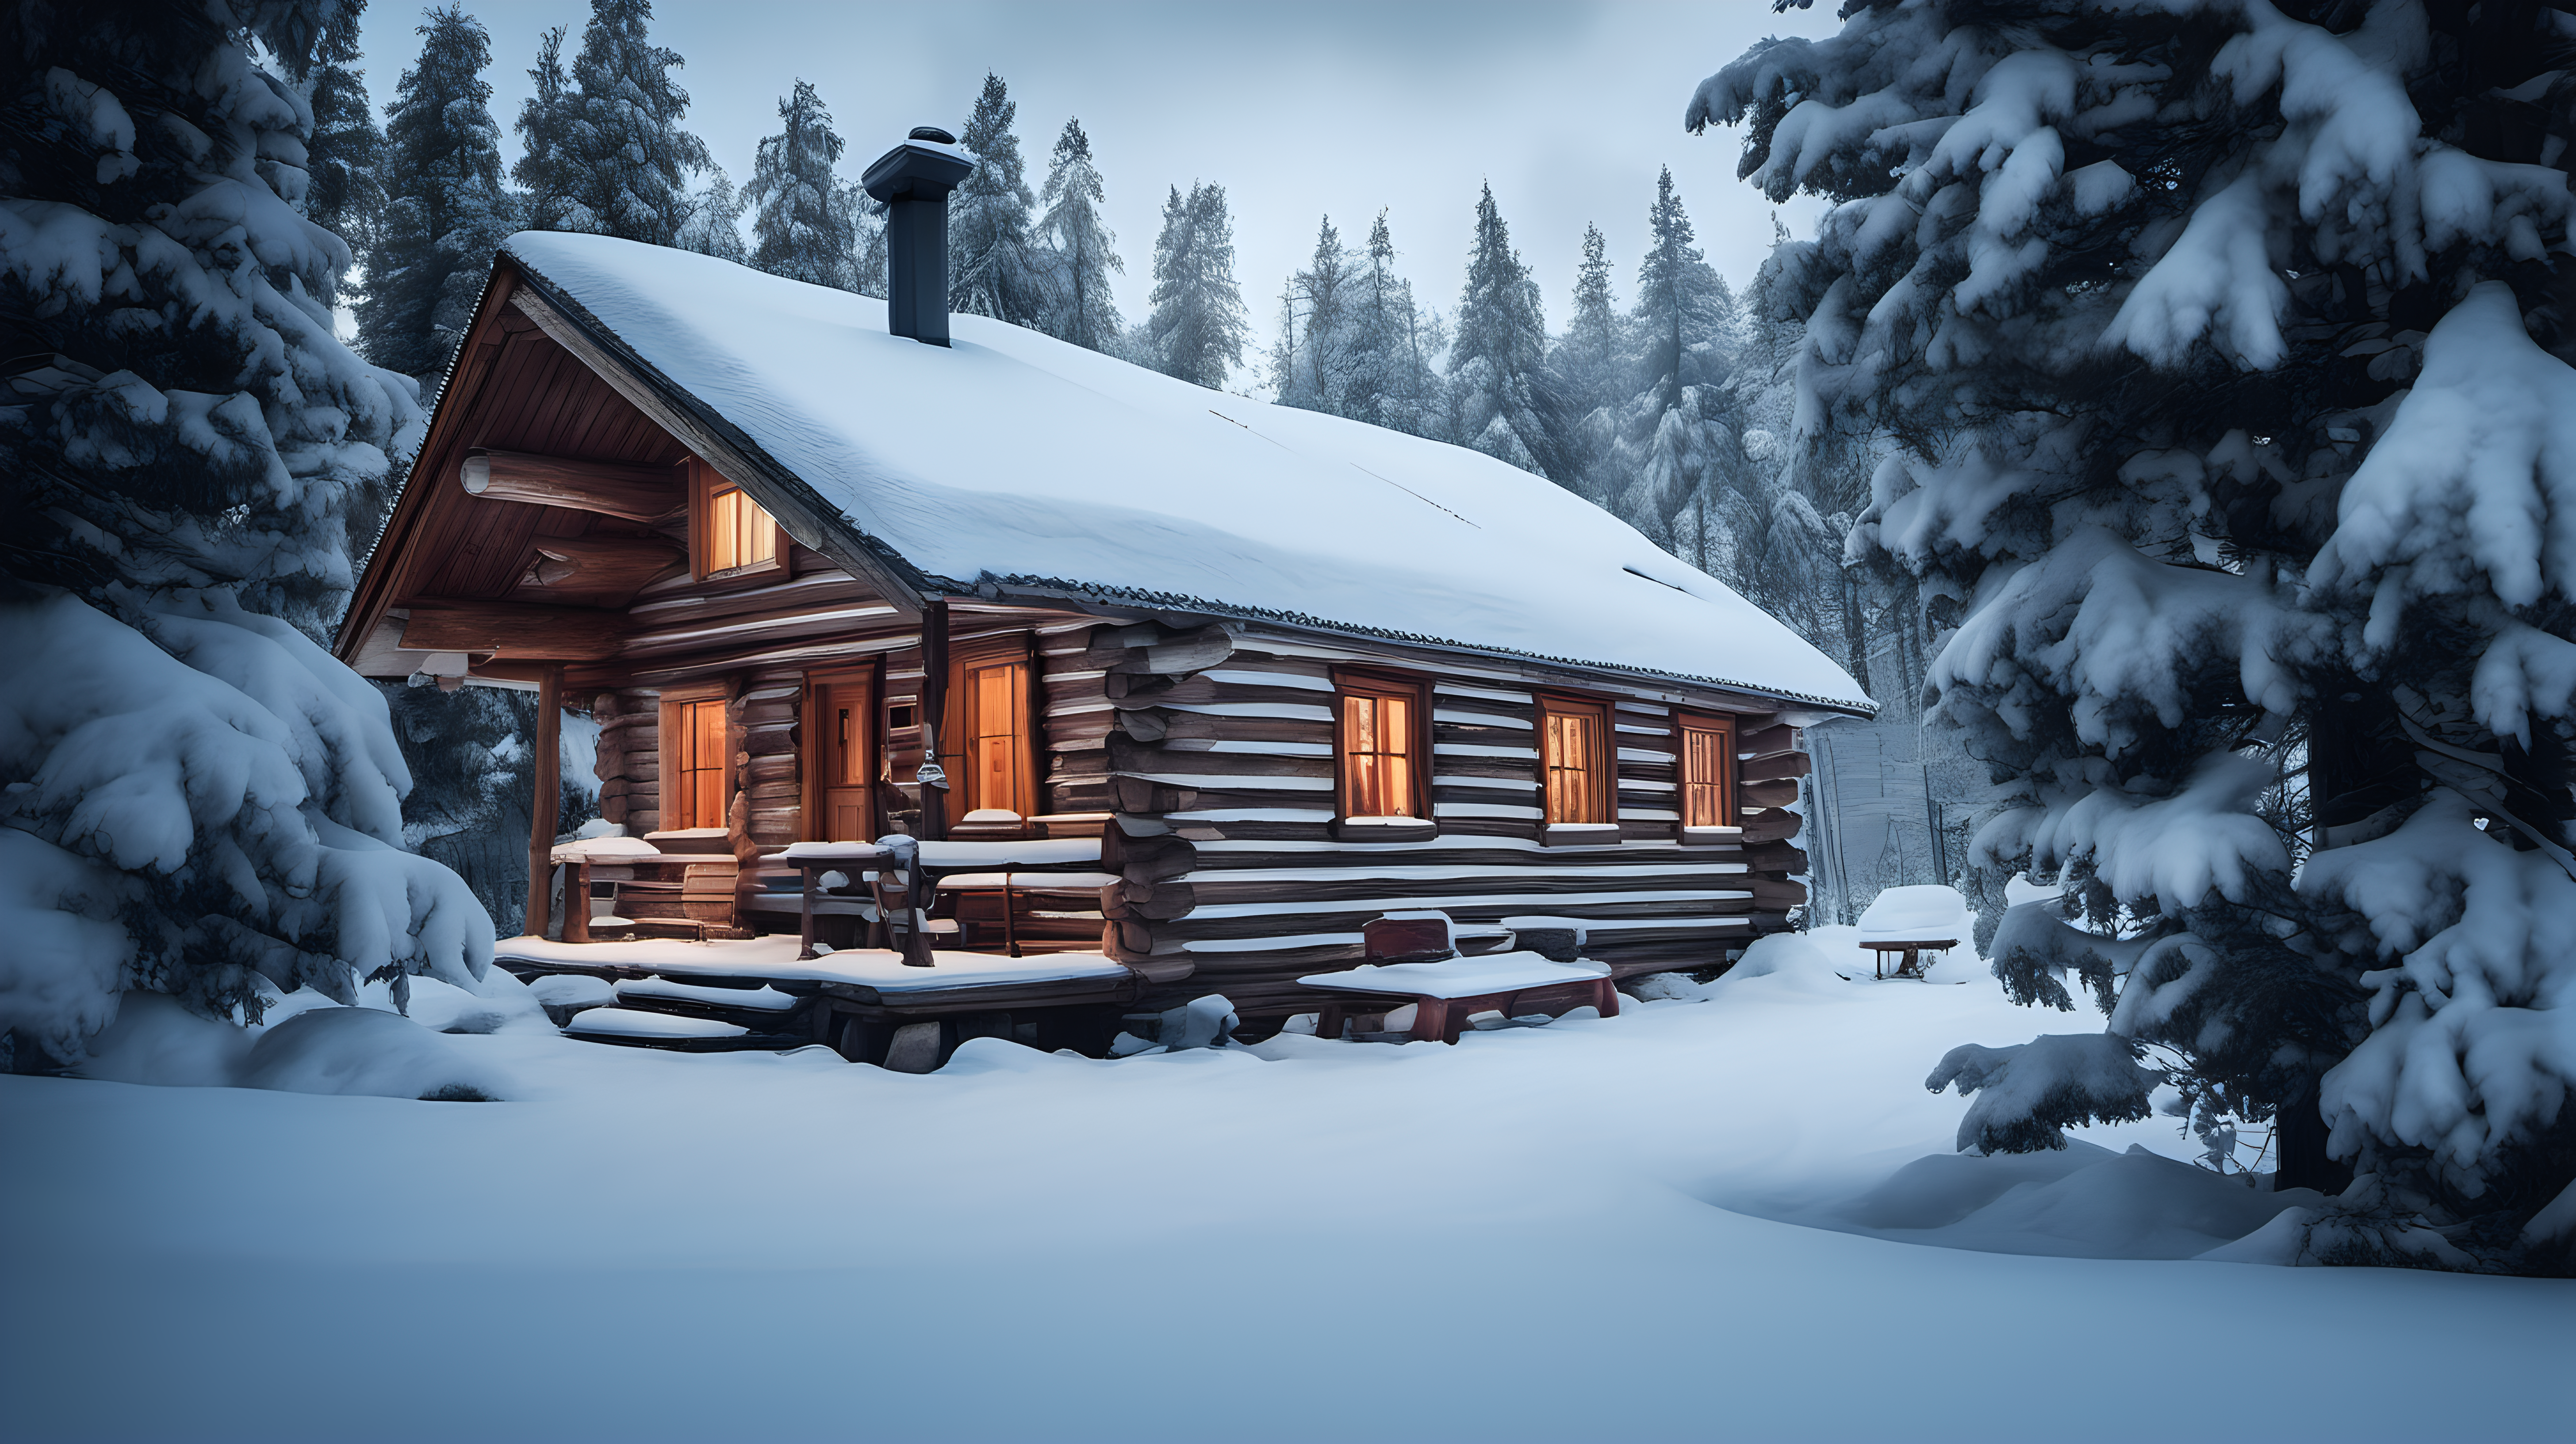 A cozy, snow-covered log cabin nestled amidst the tranquil beauty of a snowy Russian forest. Two cars, partially covered in snow, are parked in front of the cabin, creating a serene winter scene. Cozy, Snowy, Rustic, Tranquil, Winter Wonderland. DSLR camera. Wide-angle or standard lens for capturing the cabin and the surrounding snowy landscape. late afternoon. Focus on the charming cabin enveloped in snow, portraying a sense of warmth and coziness against the wintry backdrop. Frame the shot to include the cabin, the surrounding snow-laden trees, and the parked cars, highlighting the rustic charm and tranquility of the scene. Aim for high-resolution digital images to capture the intricate details of the snow-covered cabin and the forest surroundings. Post-processing can enhance the wintry atmosphere by adjusting exposure and contrast, showcasing the inviting coziness of the cabin amidst the snowy Russian forest.



